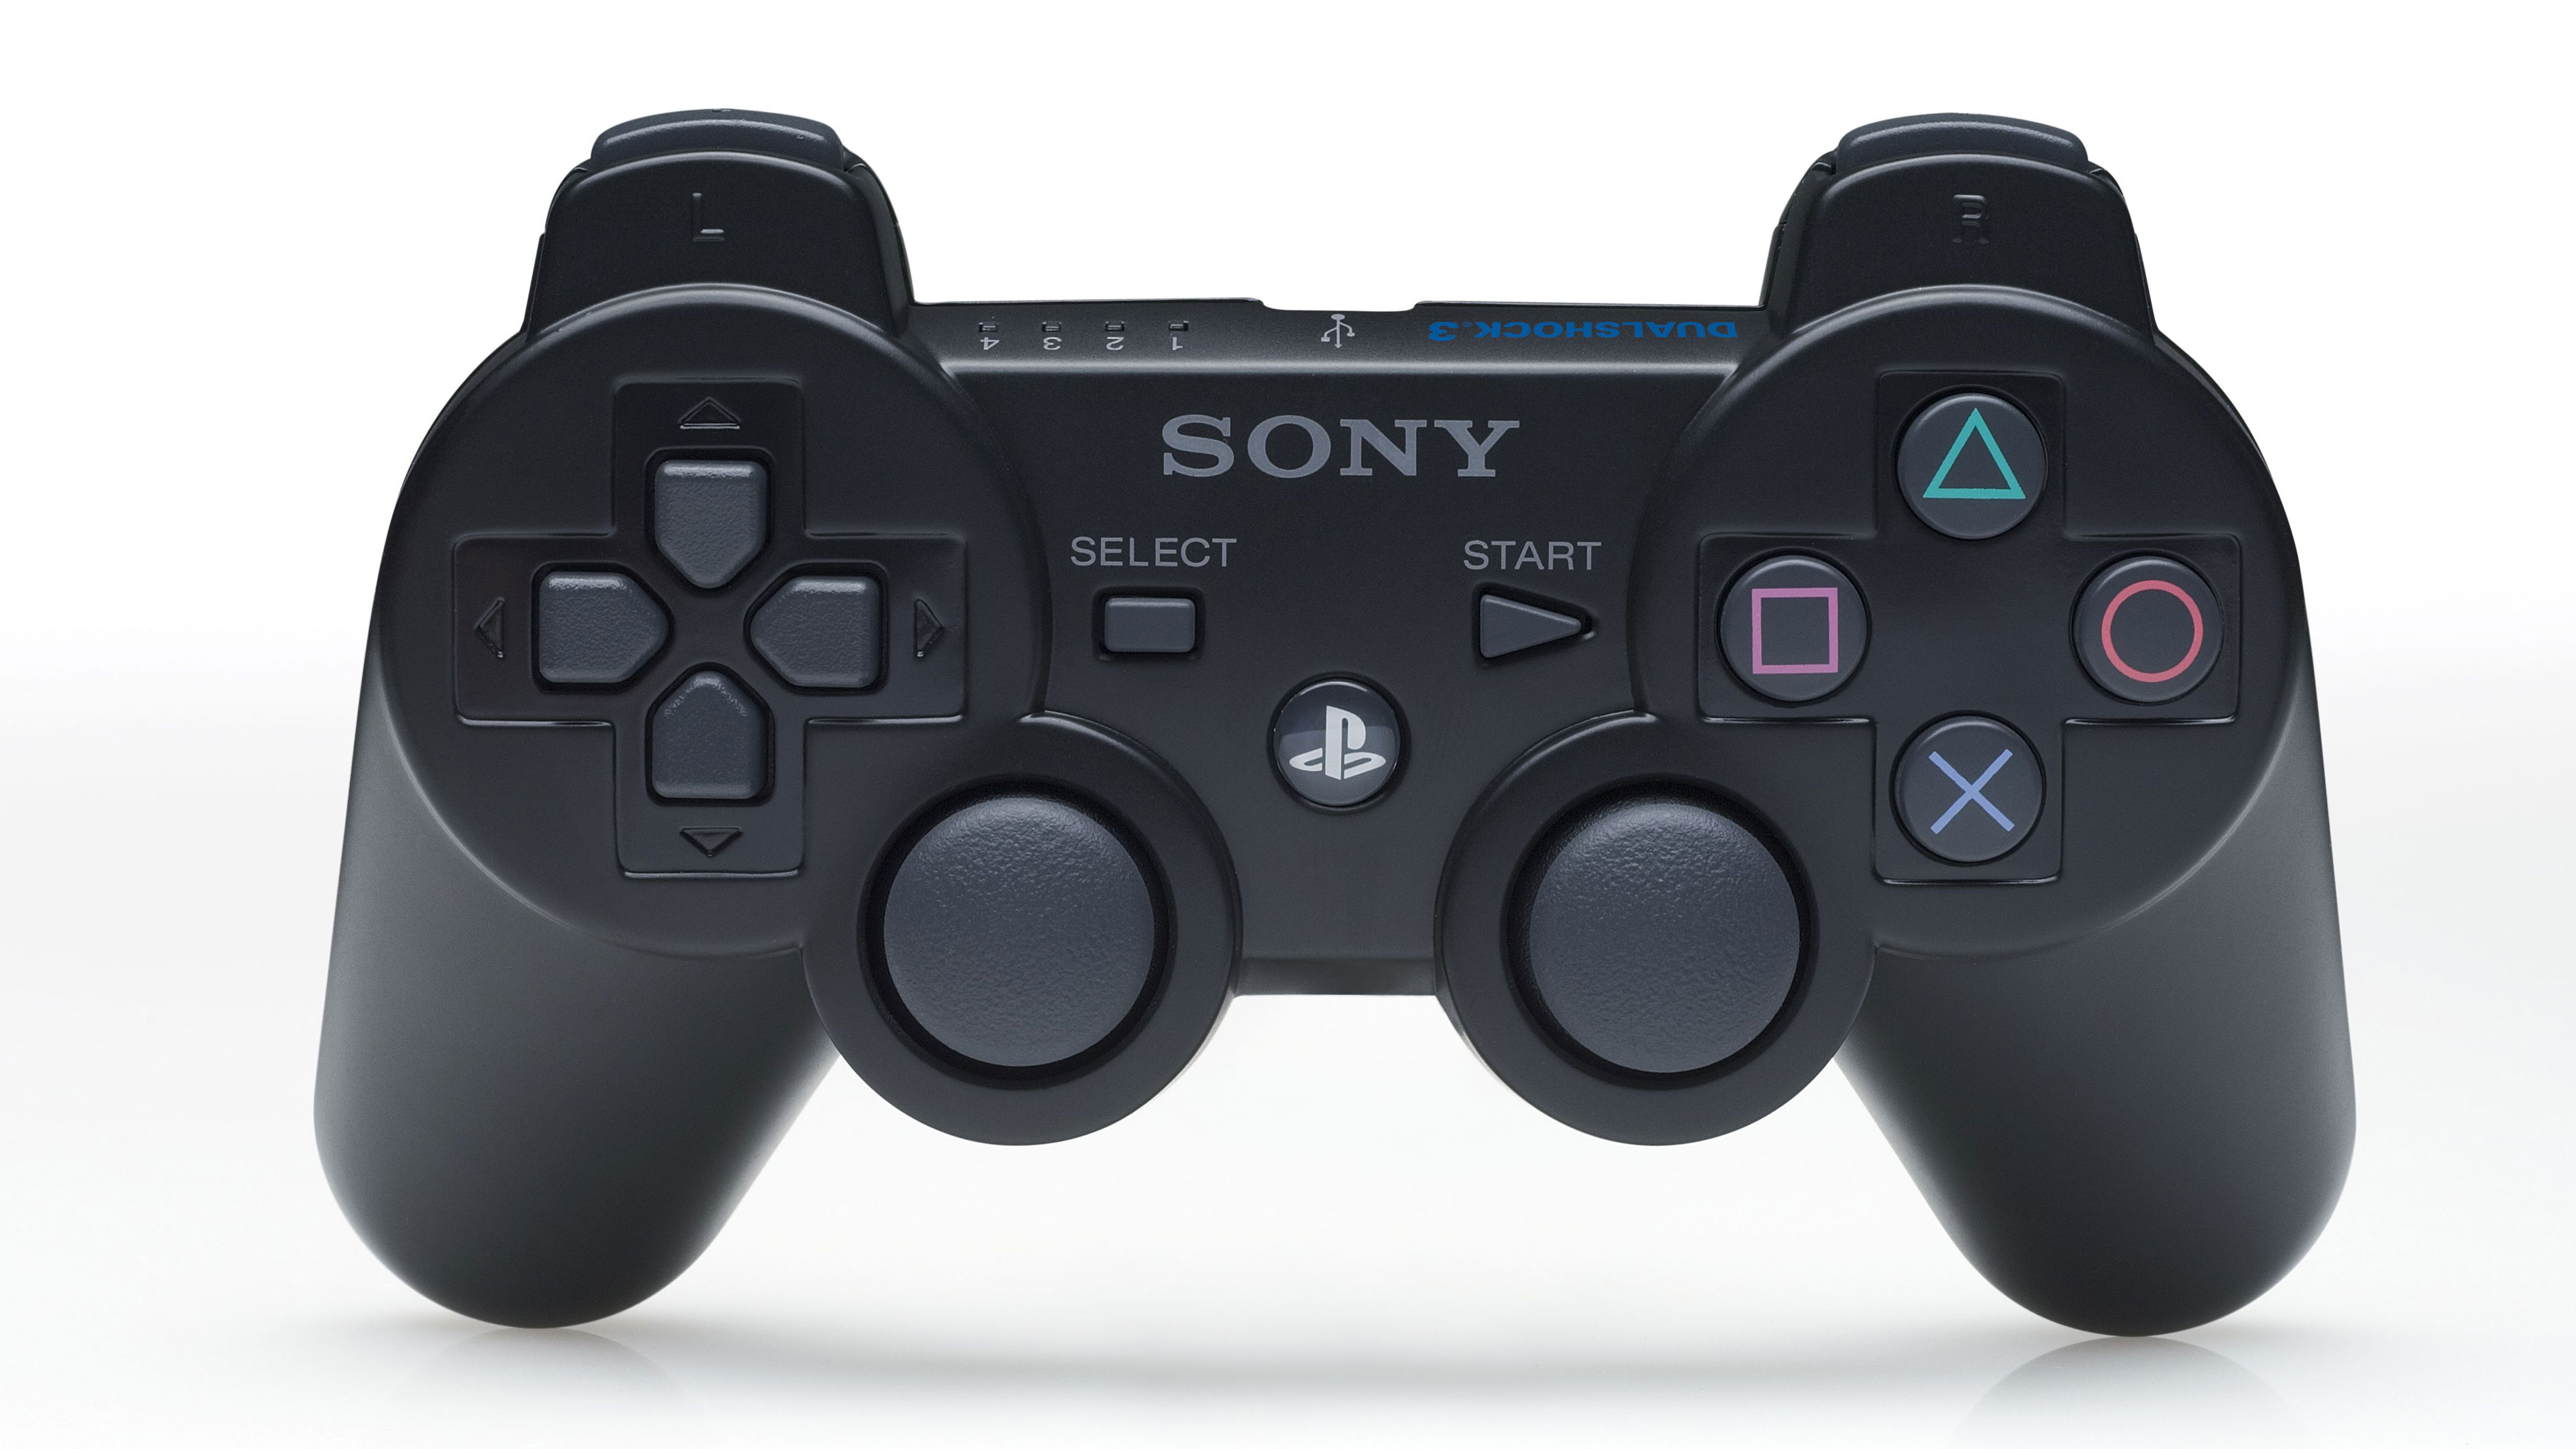 PS4 controller to have touchpad but Share button, source says | TechRadar